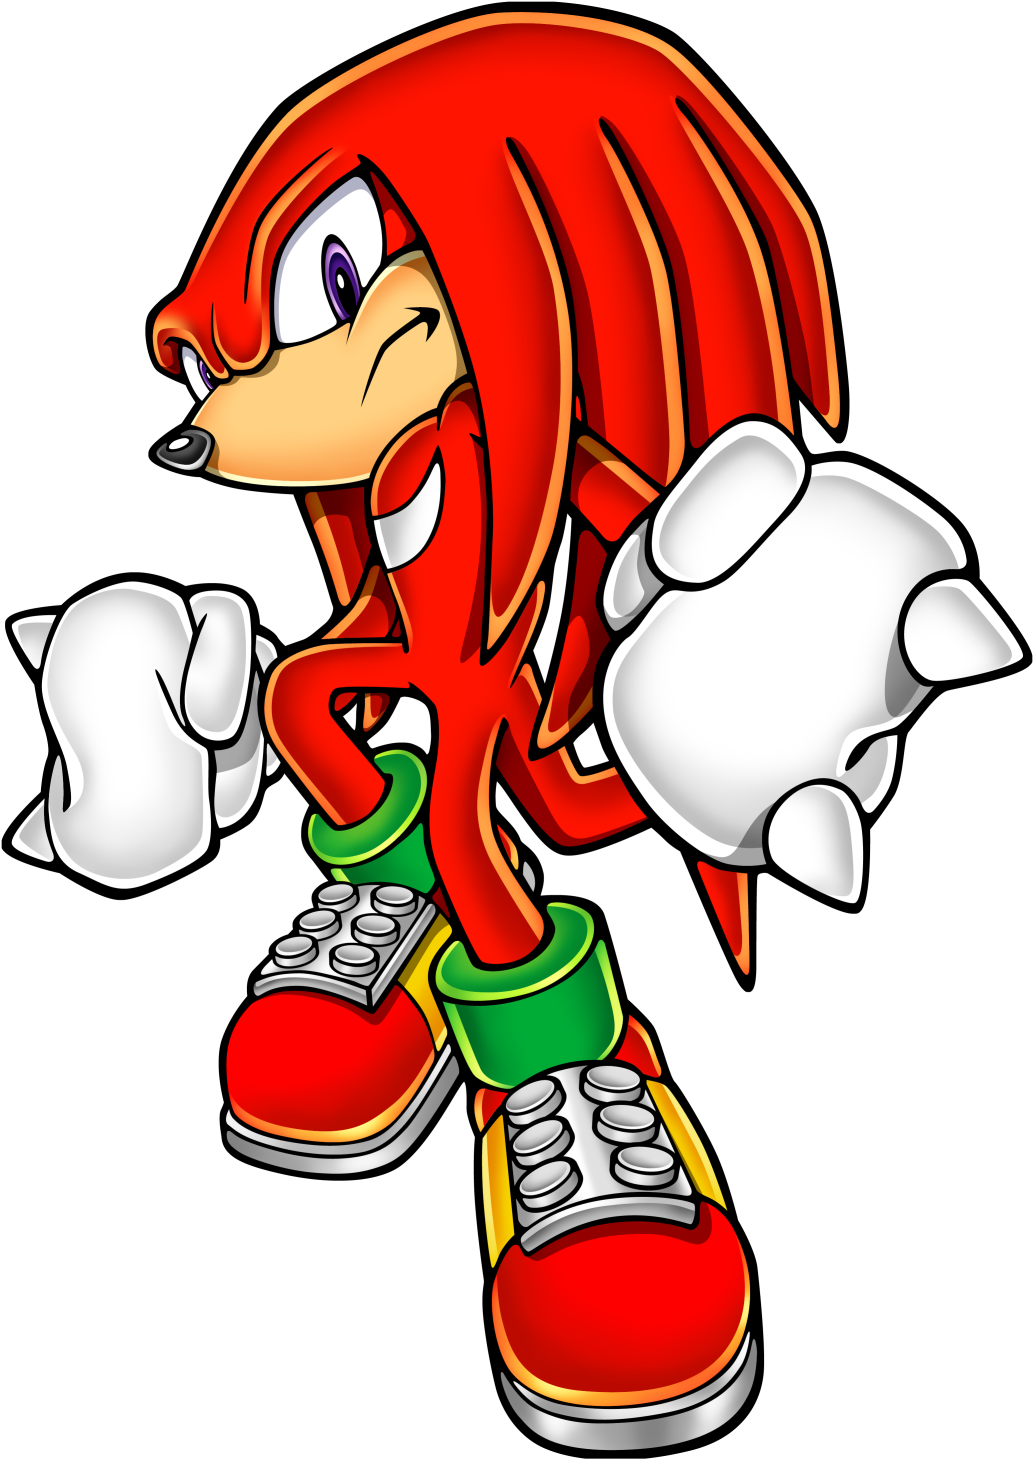 222-2226281_knuckles-16-knuckles-the-ech